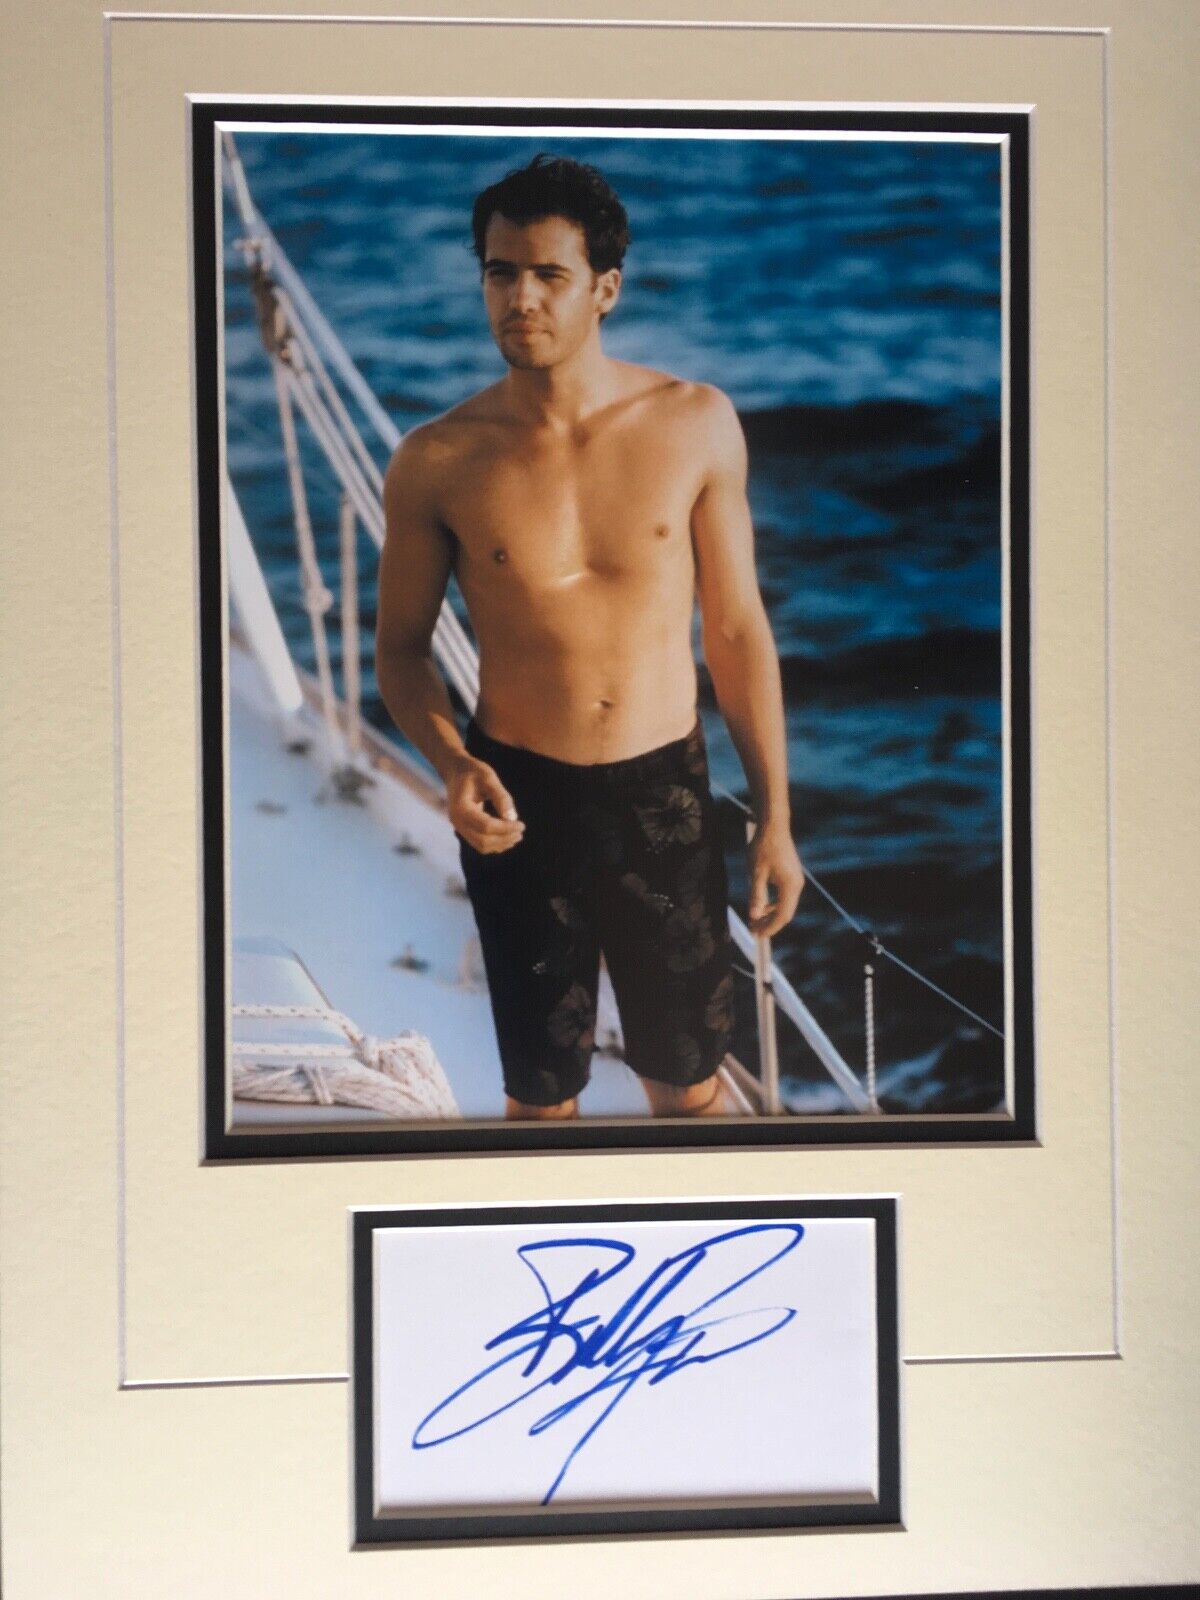 BILLY ZANE - TITANIC - AMERICAN FILM ACTOR - STUNNING SIGNED Photo Poster painting DISPLAY